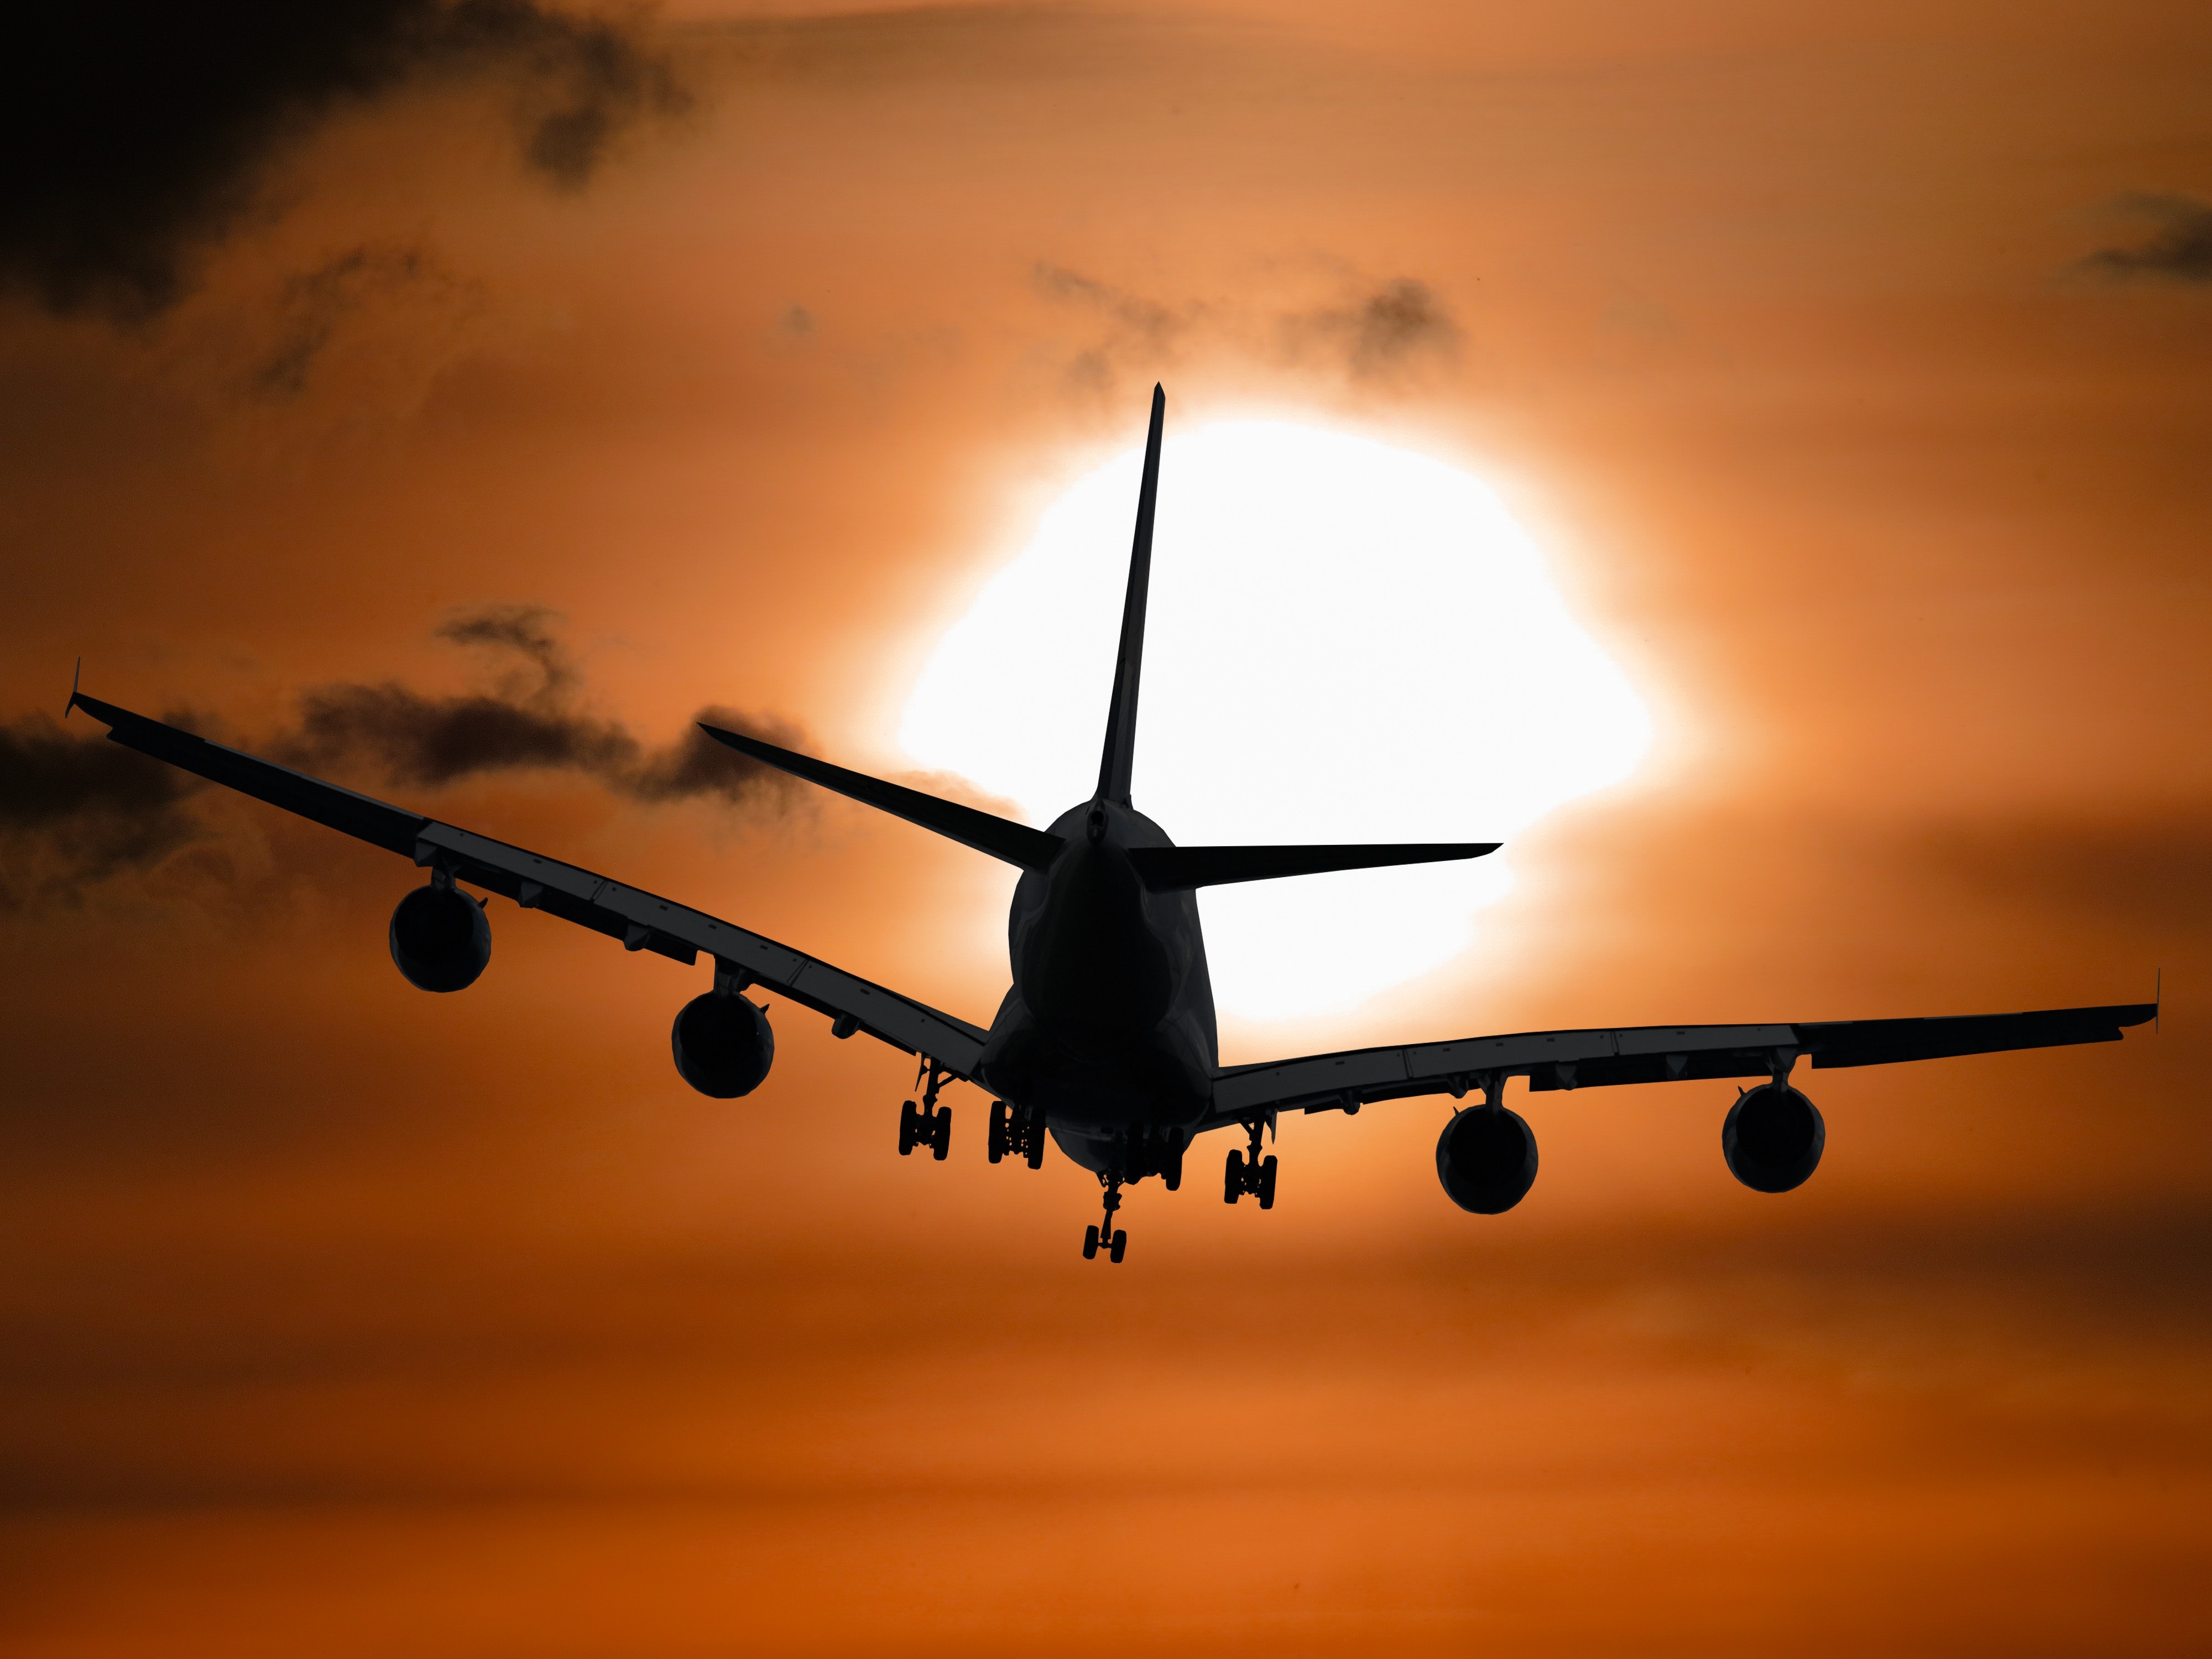 Shadow Image of a Plane Flying during Sunset, Aeroplane, Aircraft, Airplane, Aviation, HQ Photo